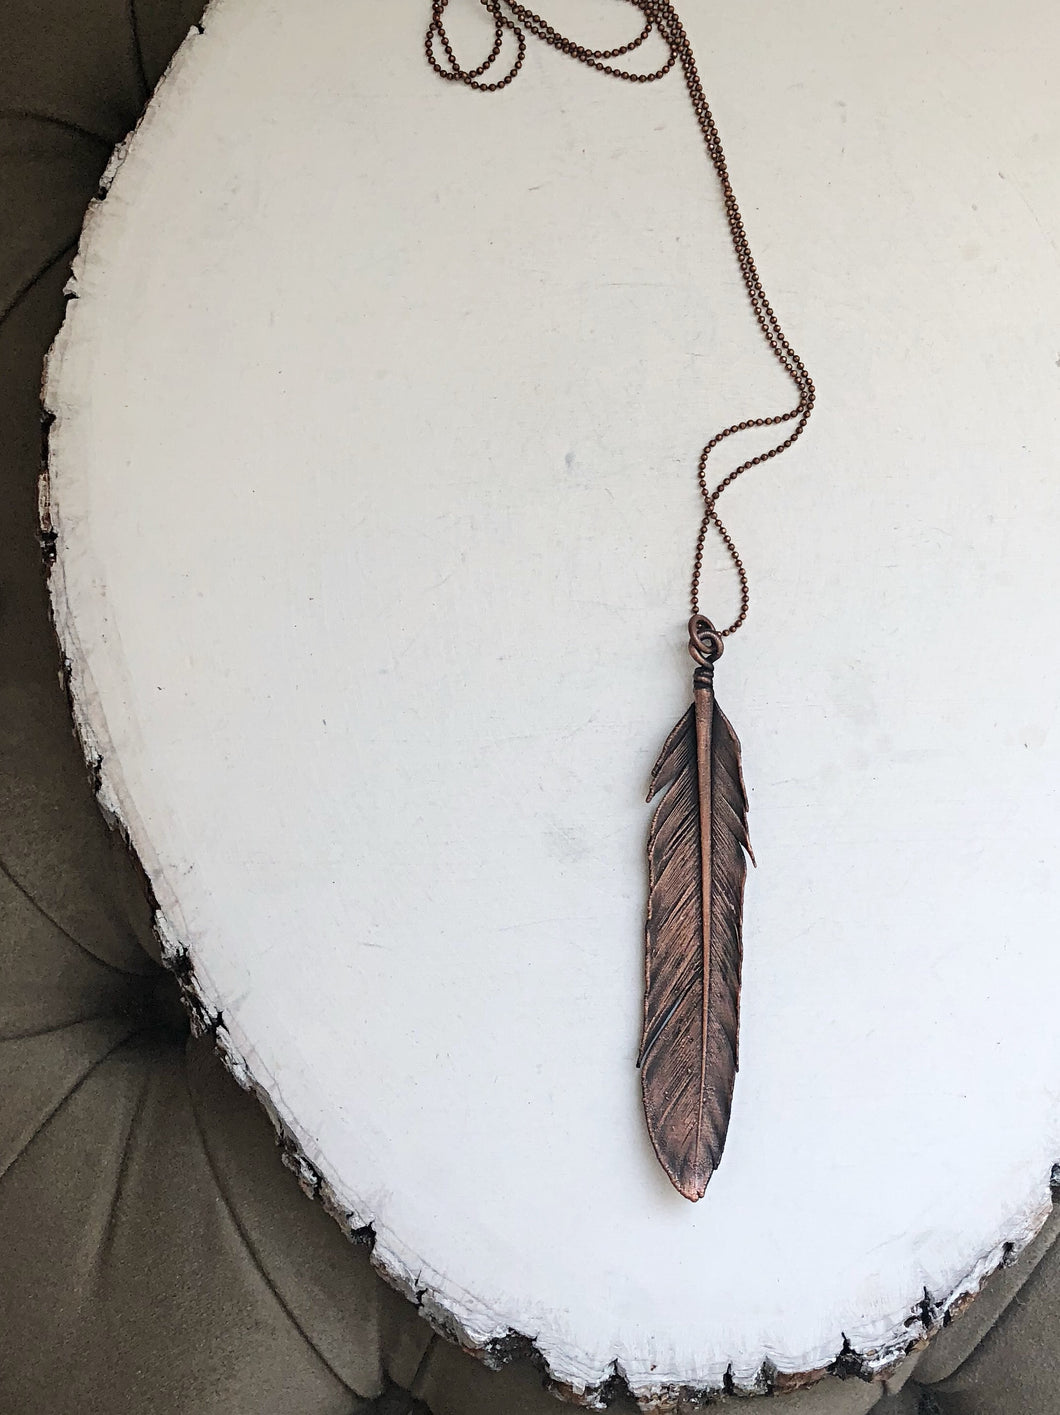 Electroformed Feather Necklace #1 - Ready to Ship (5/17 Update)